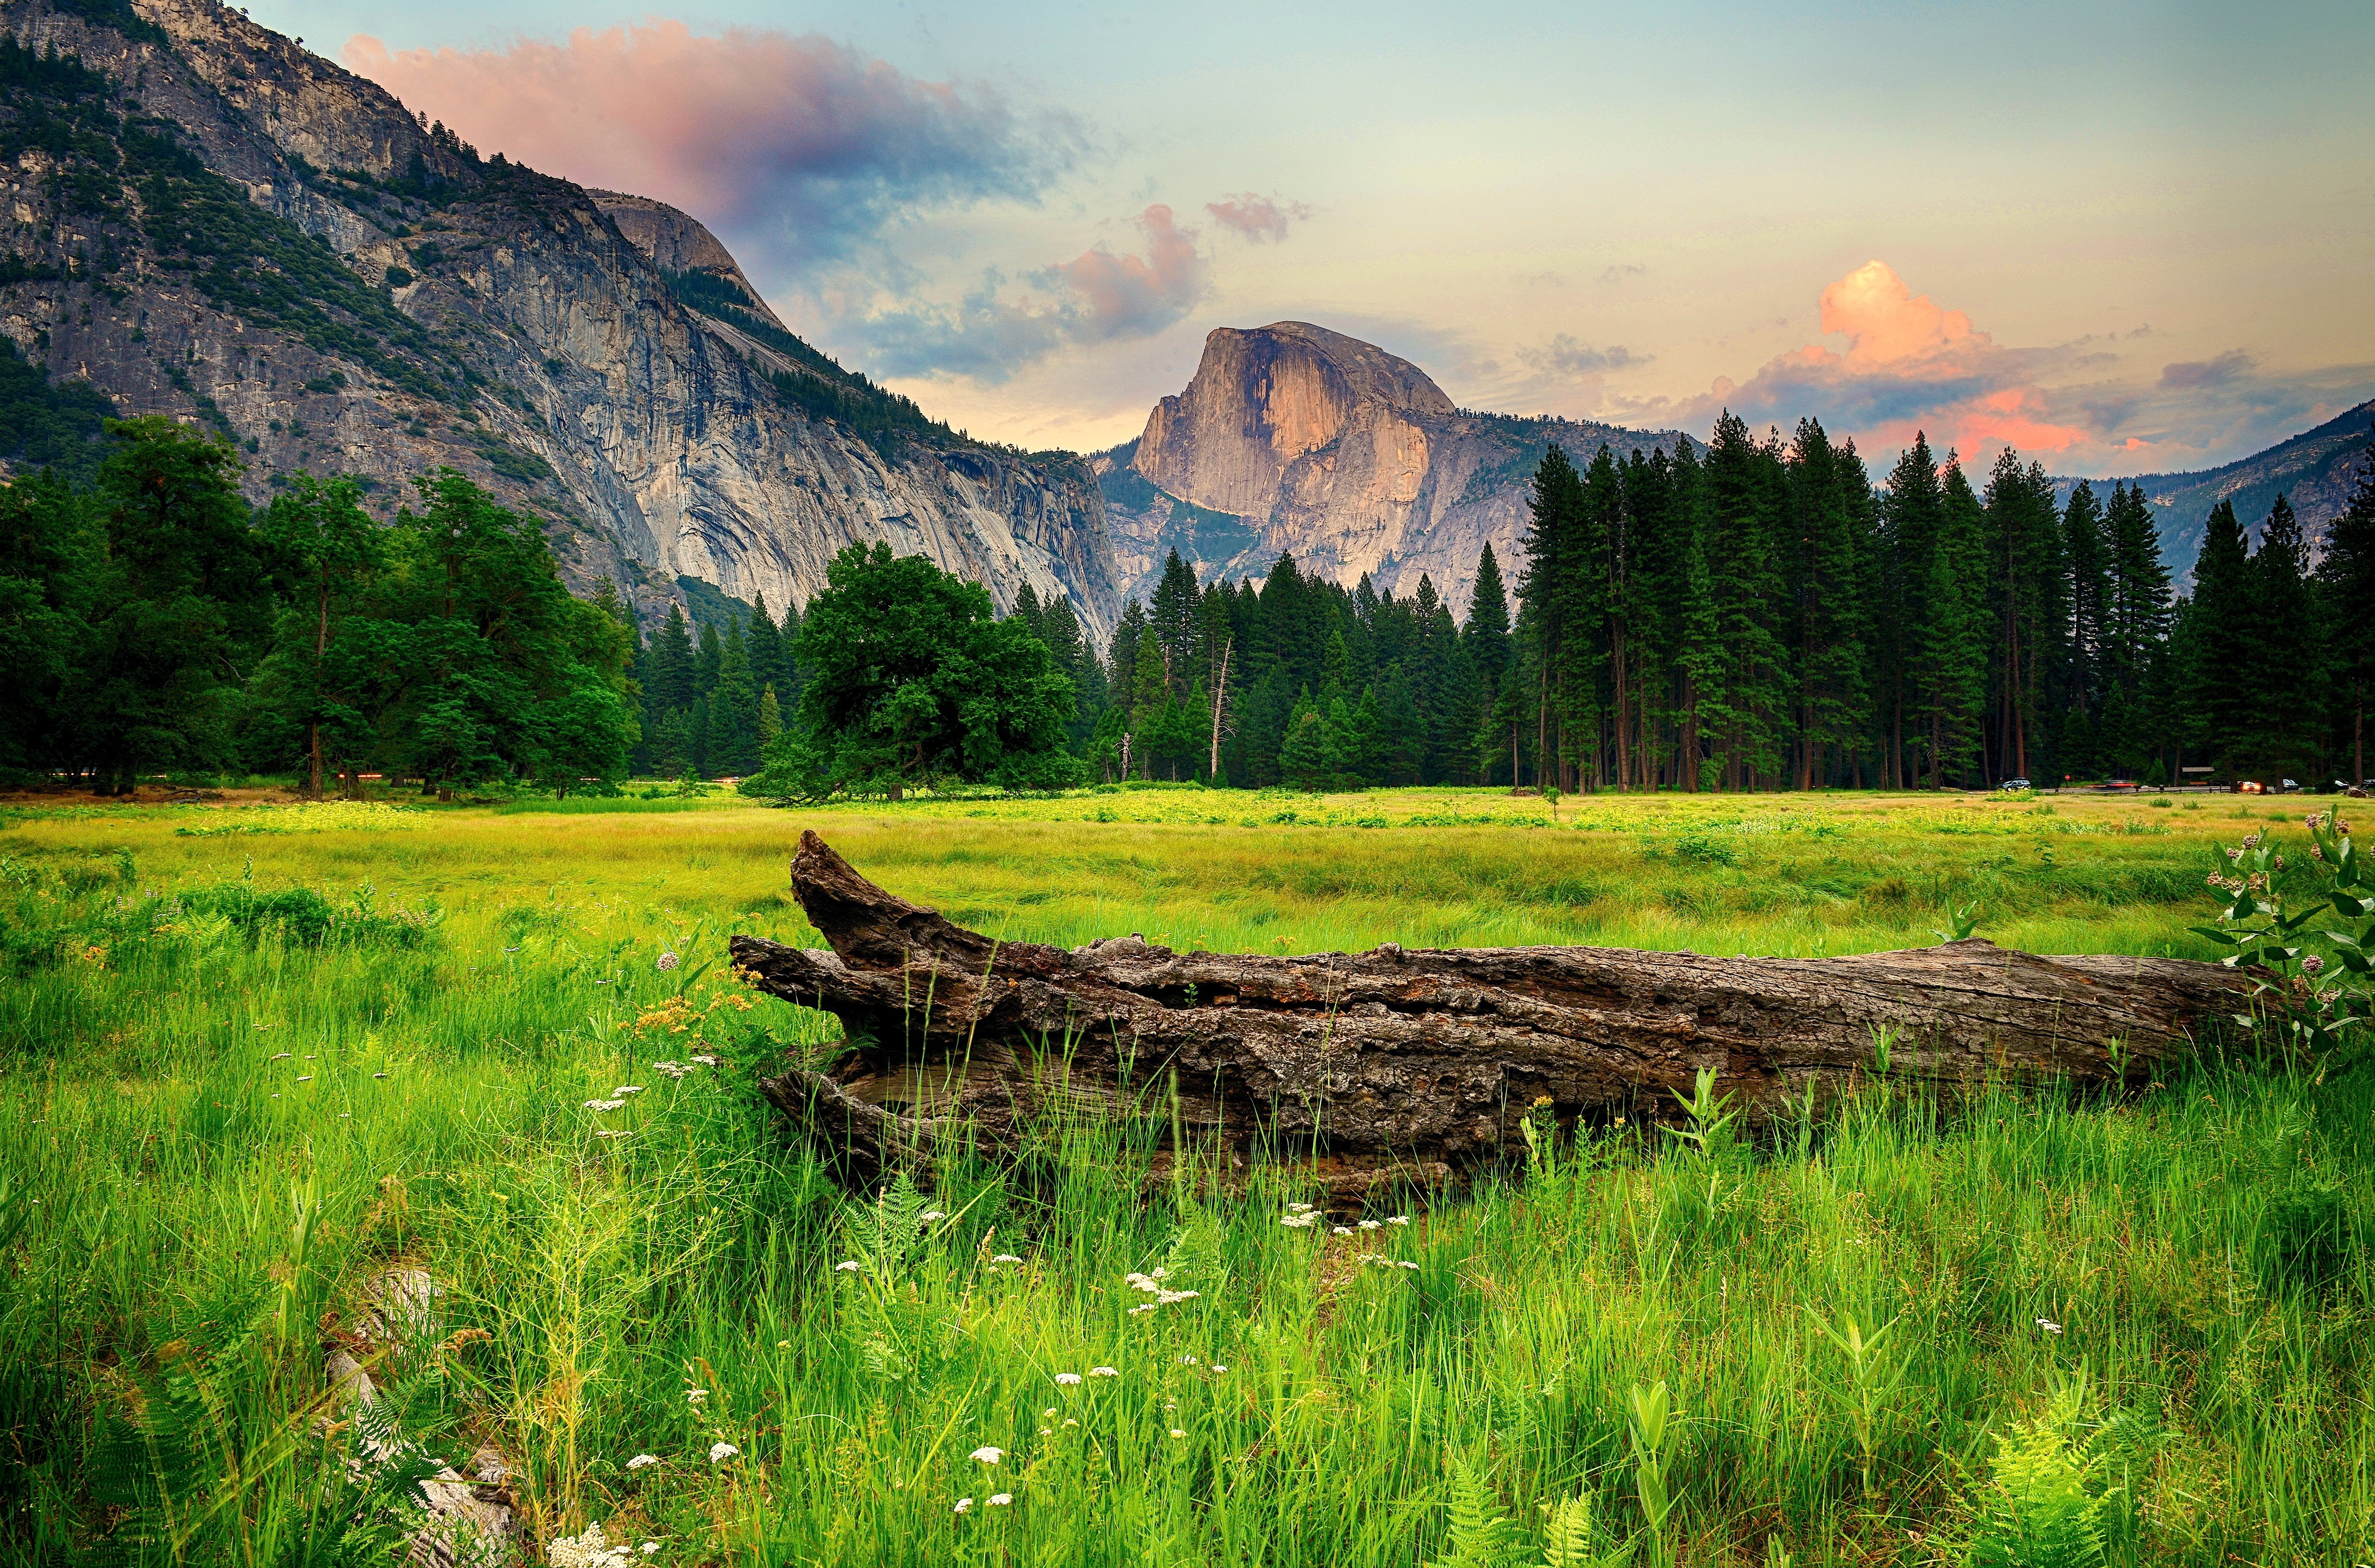 usa, Parks, Mountains, Forests, Scenery, Yosemite, Grass, Nature Wallpaper